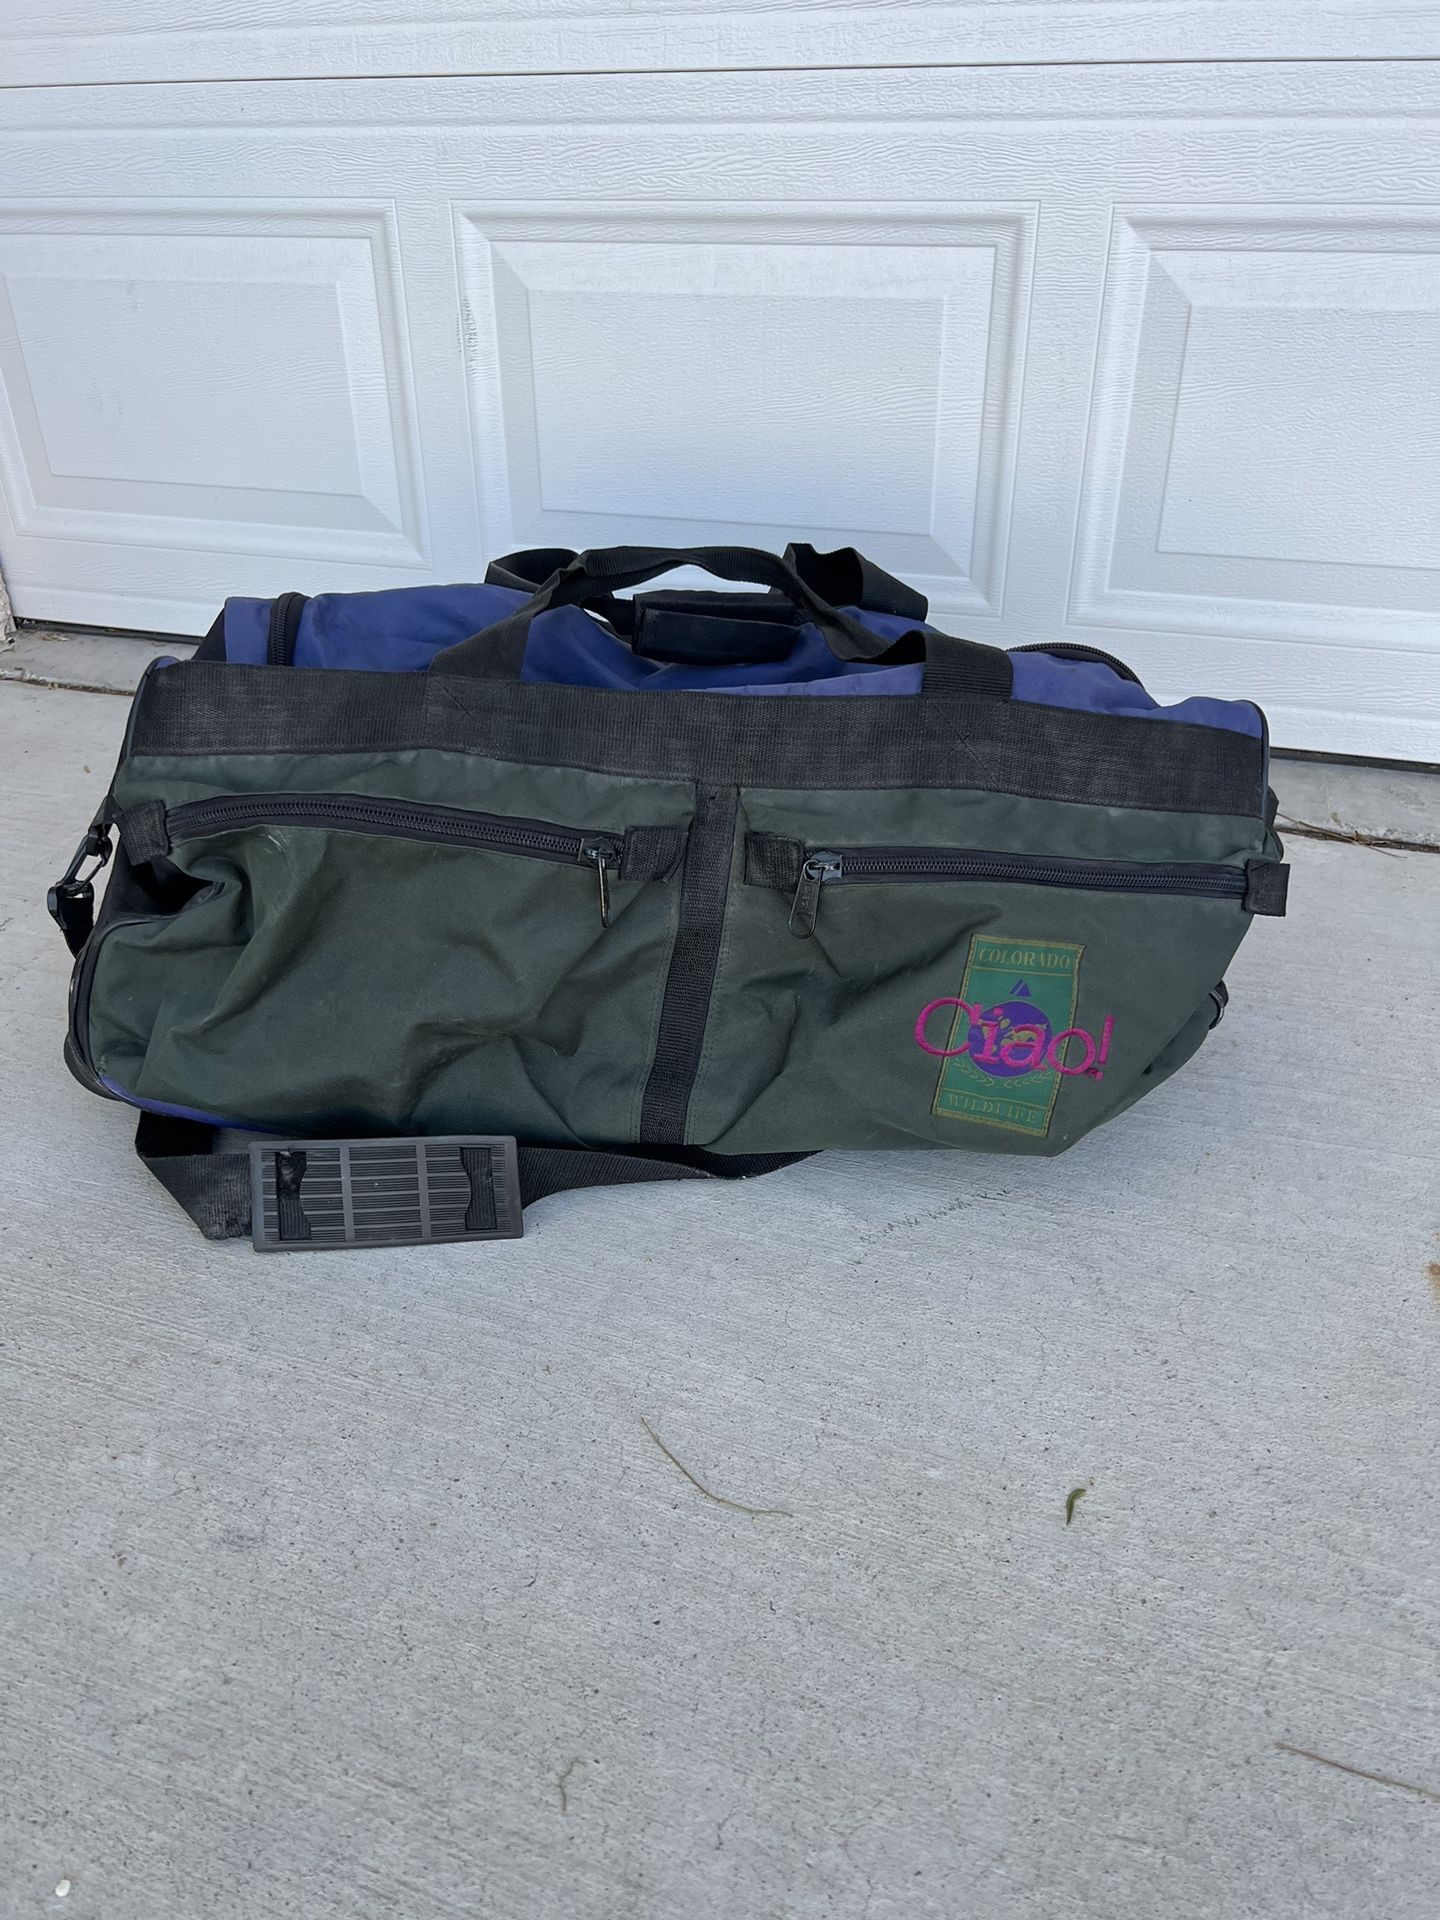 Large Rolling Duffle Bag  - Vintage 90s Colorado Wildlife Ciao  Duffle bag